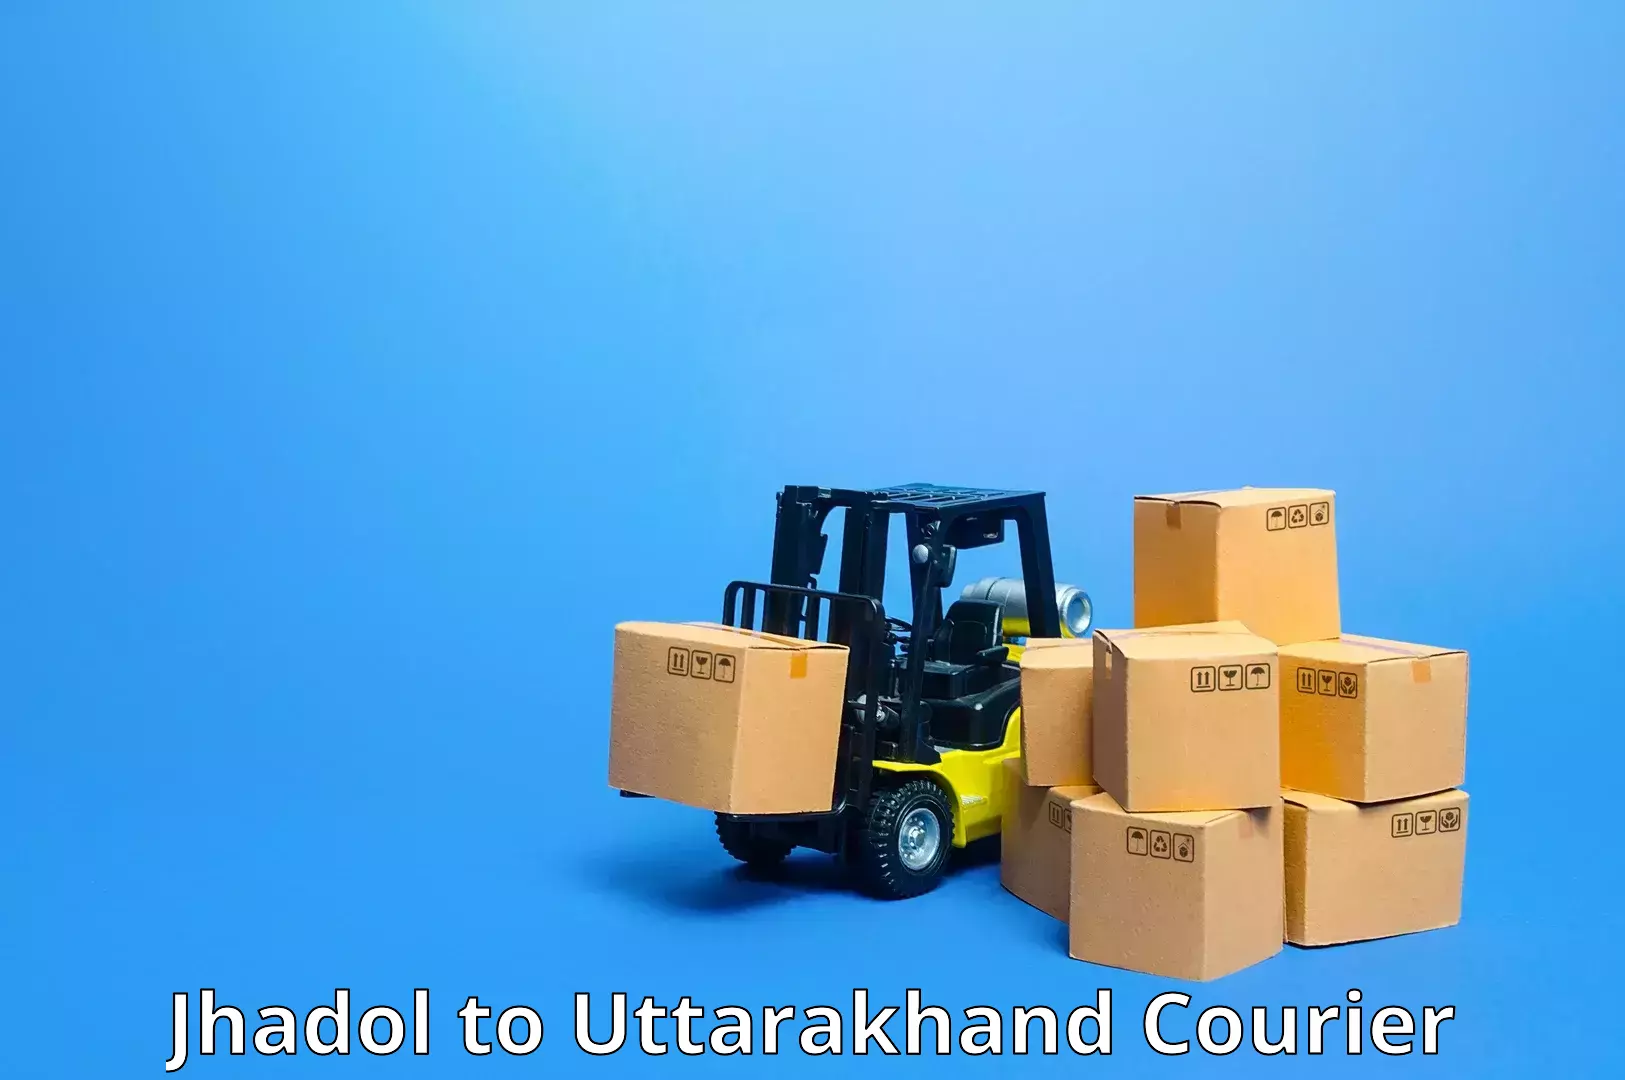 Express courier capabilities Jhadol to Bhagwanpur